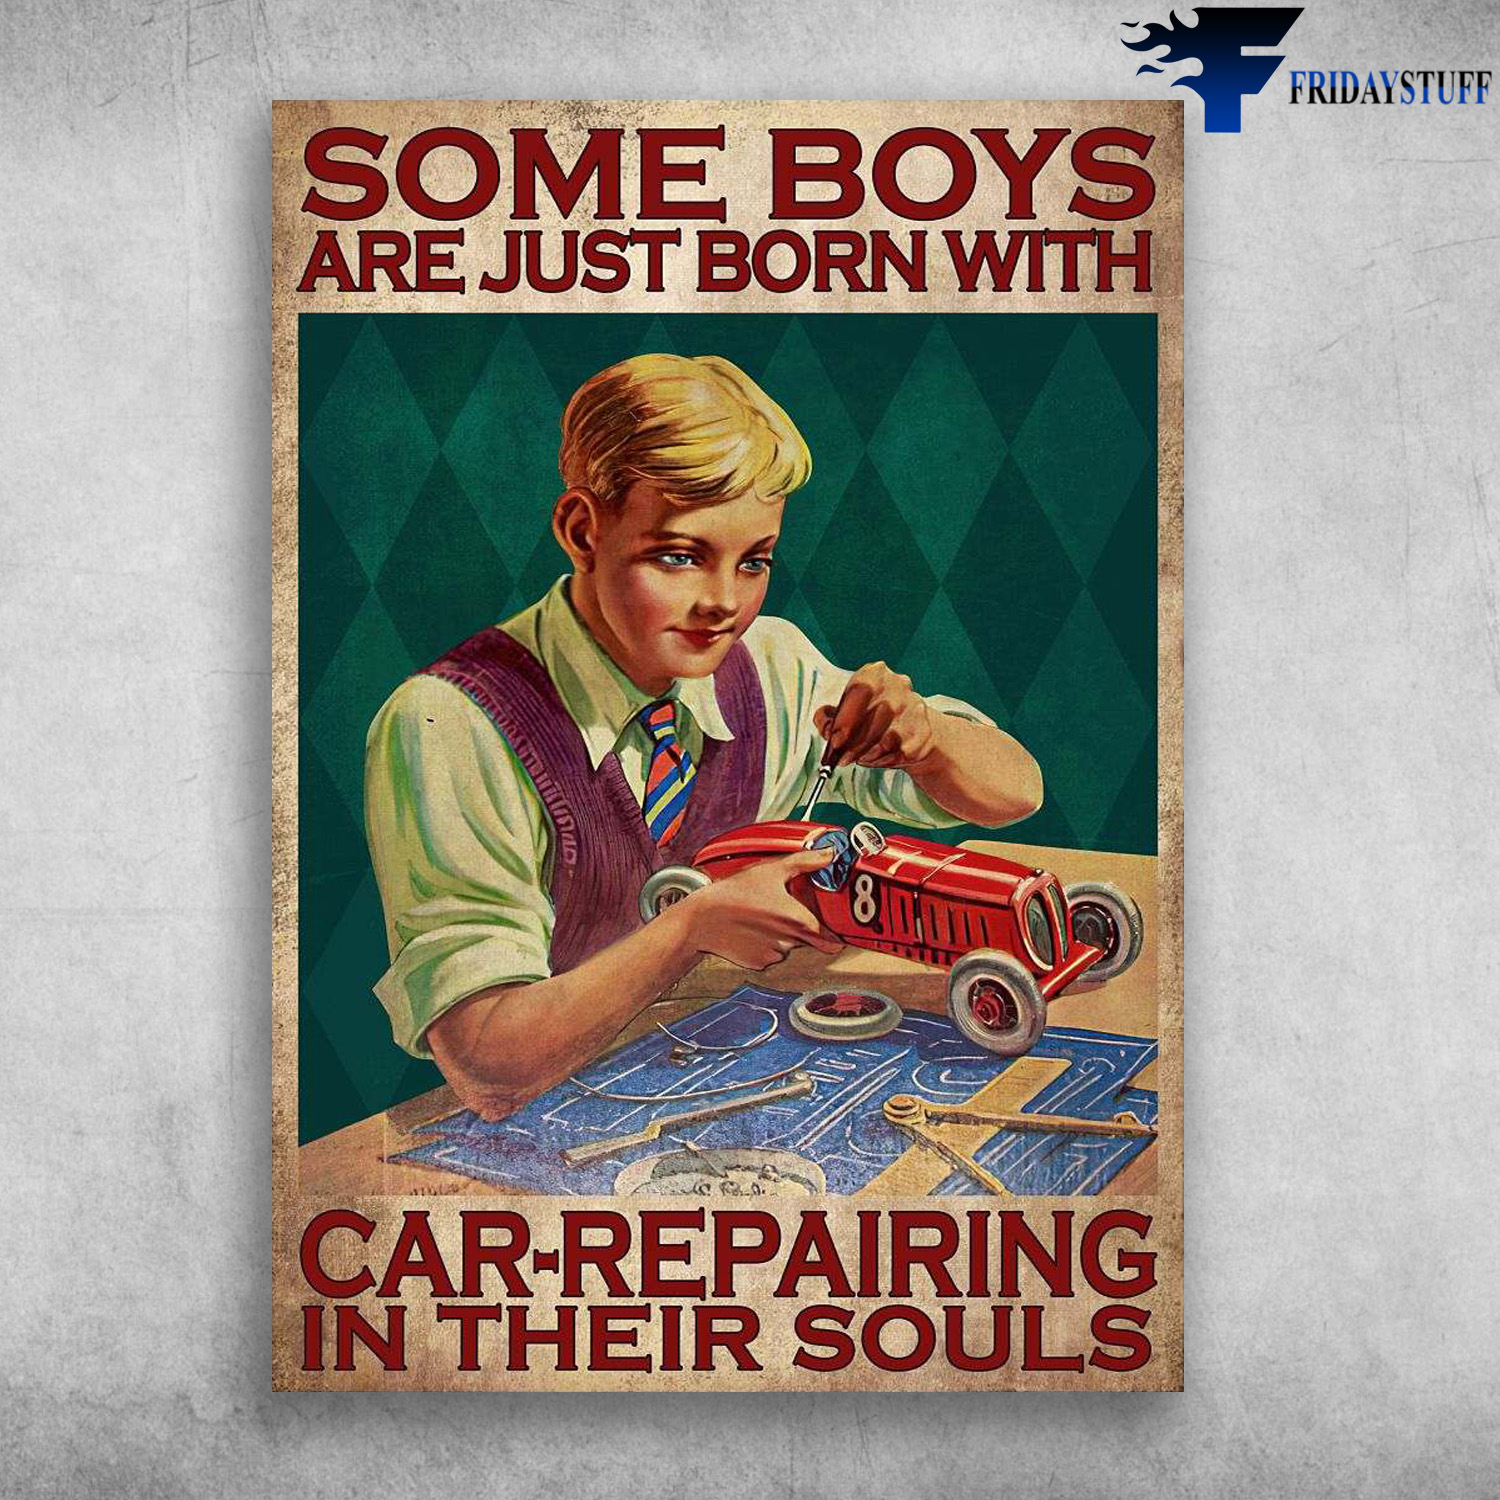 Car-Repairing Boy - Some Boys Are Just Born With, Car-Repairing In Their Souls